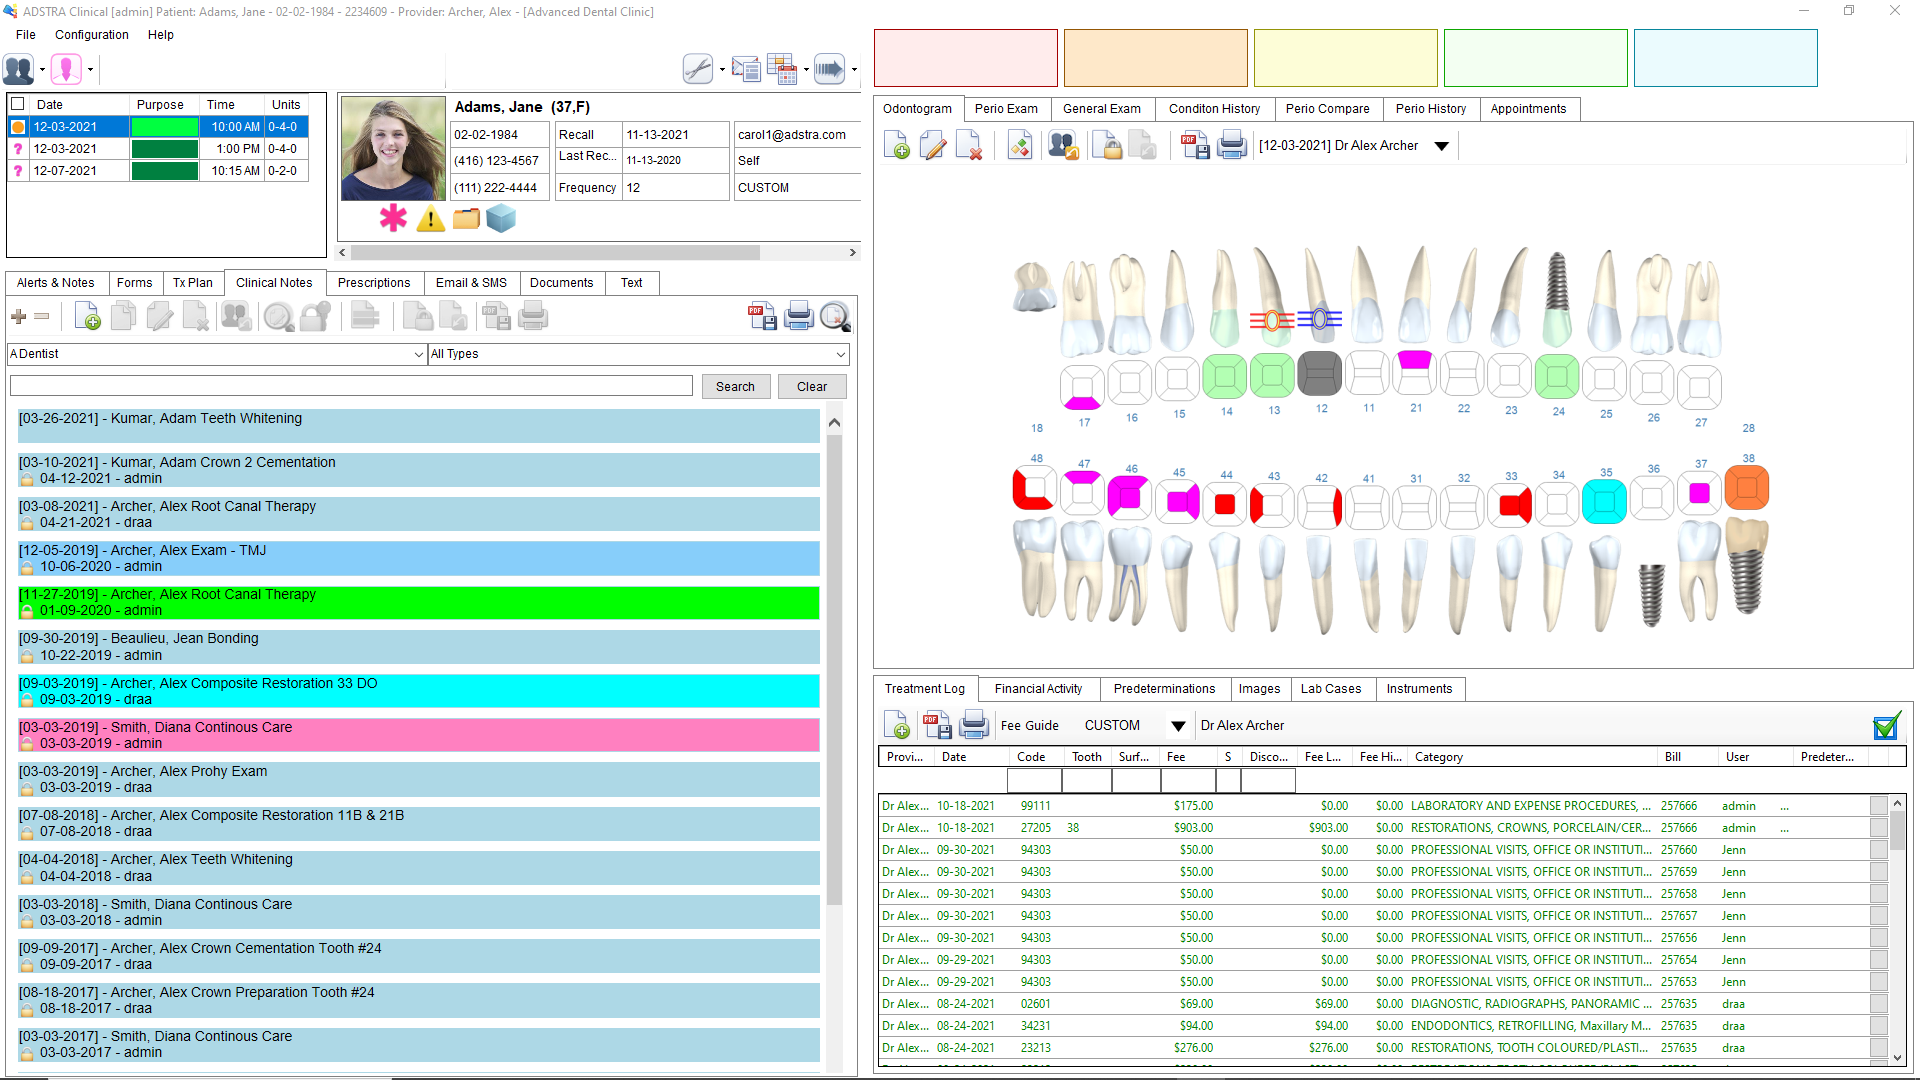 ADSTRA Dental Software Software - ADSTRA is an integrated dental software solution with an intuitive, user-friendly interface with tools for managing all aspects of patient care.